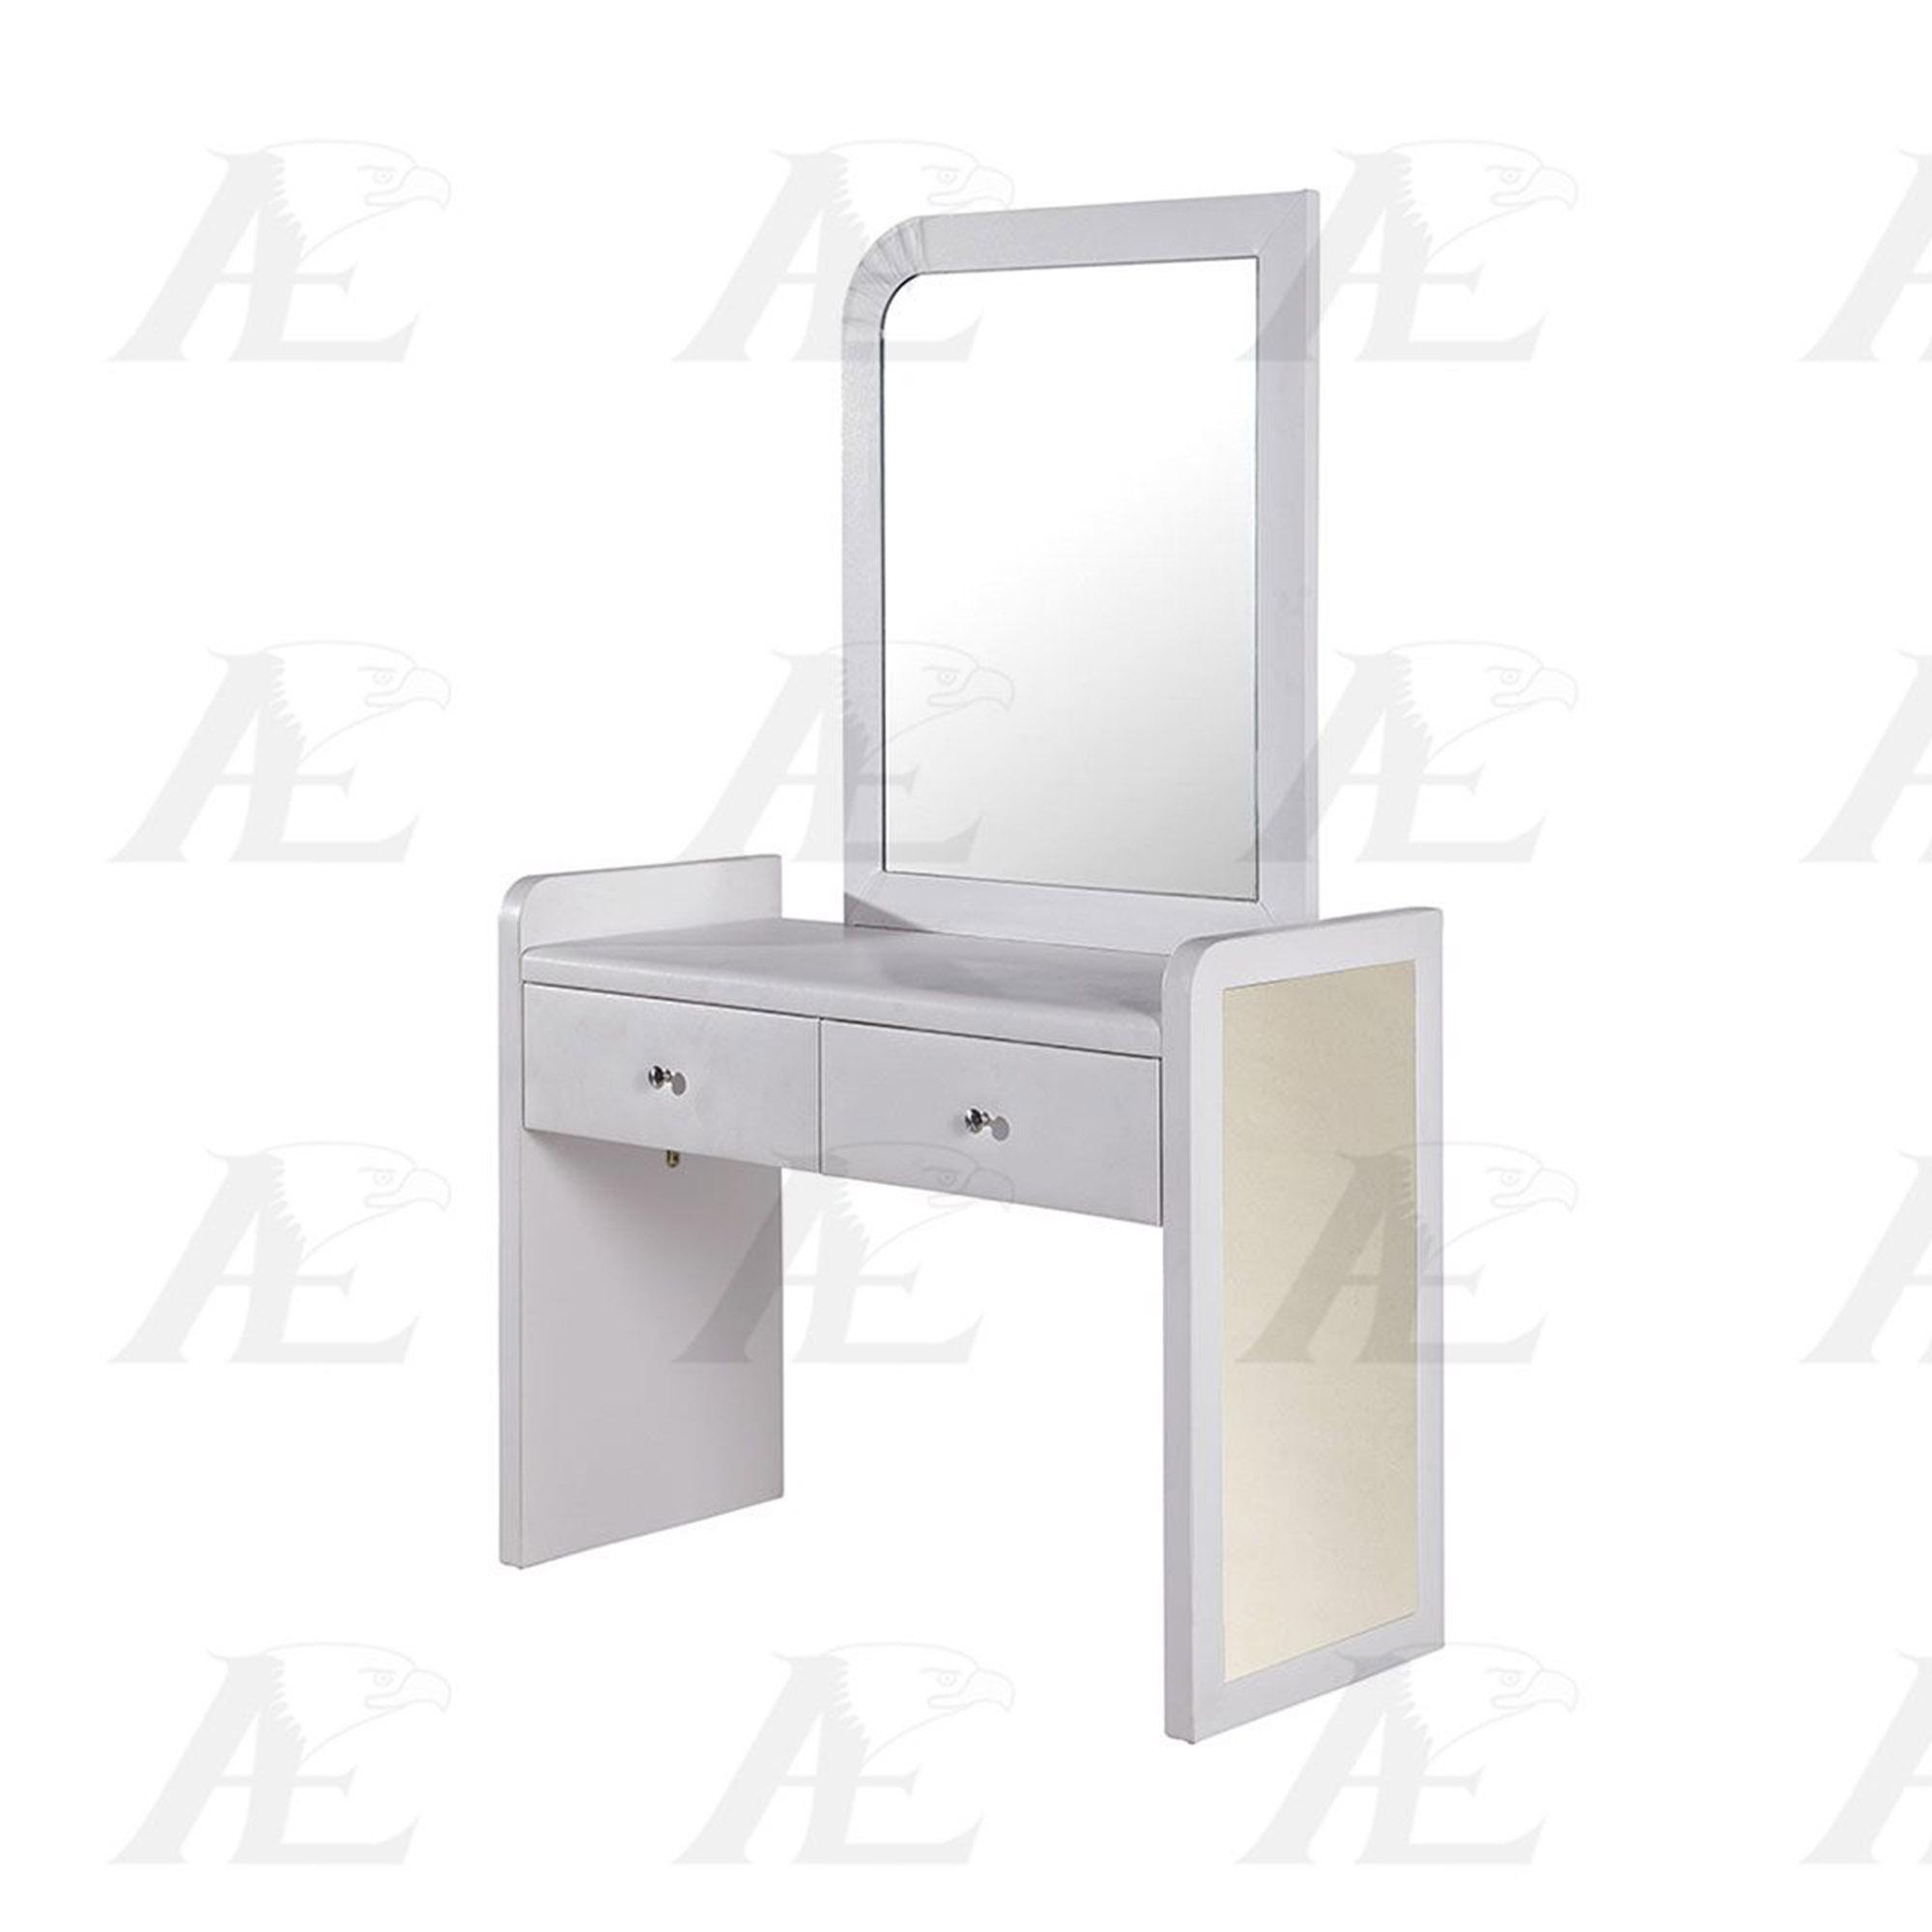 Modern Vanity with Stool Set JT003-W.CRM JT003-W.CRM Set-2 in White, Cream 